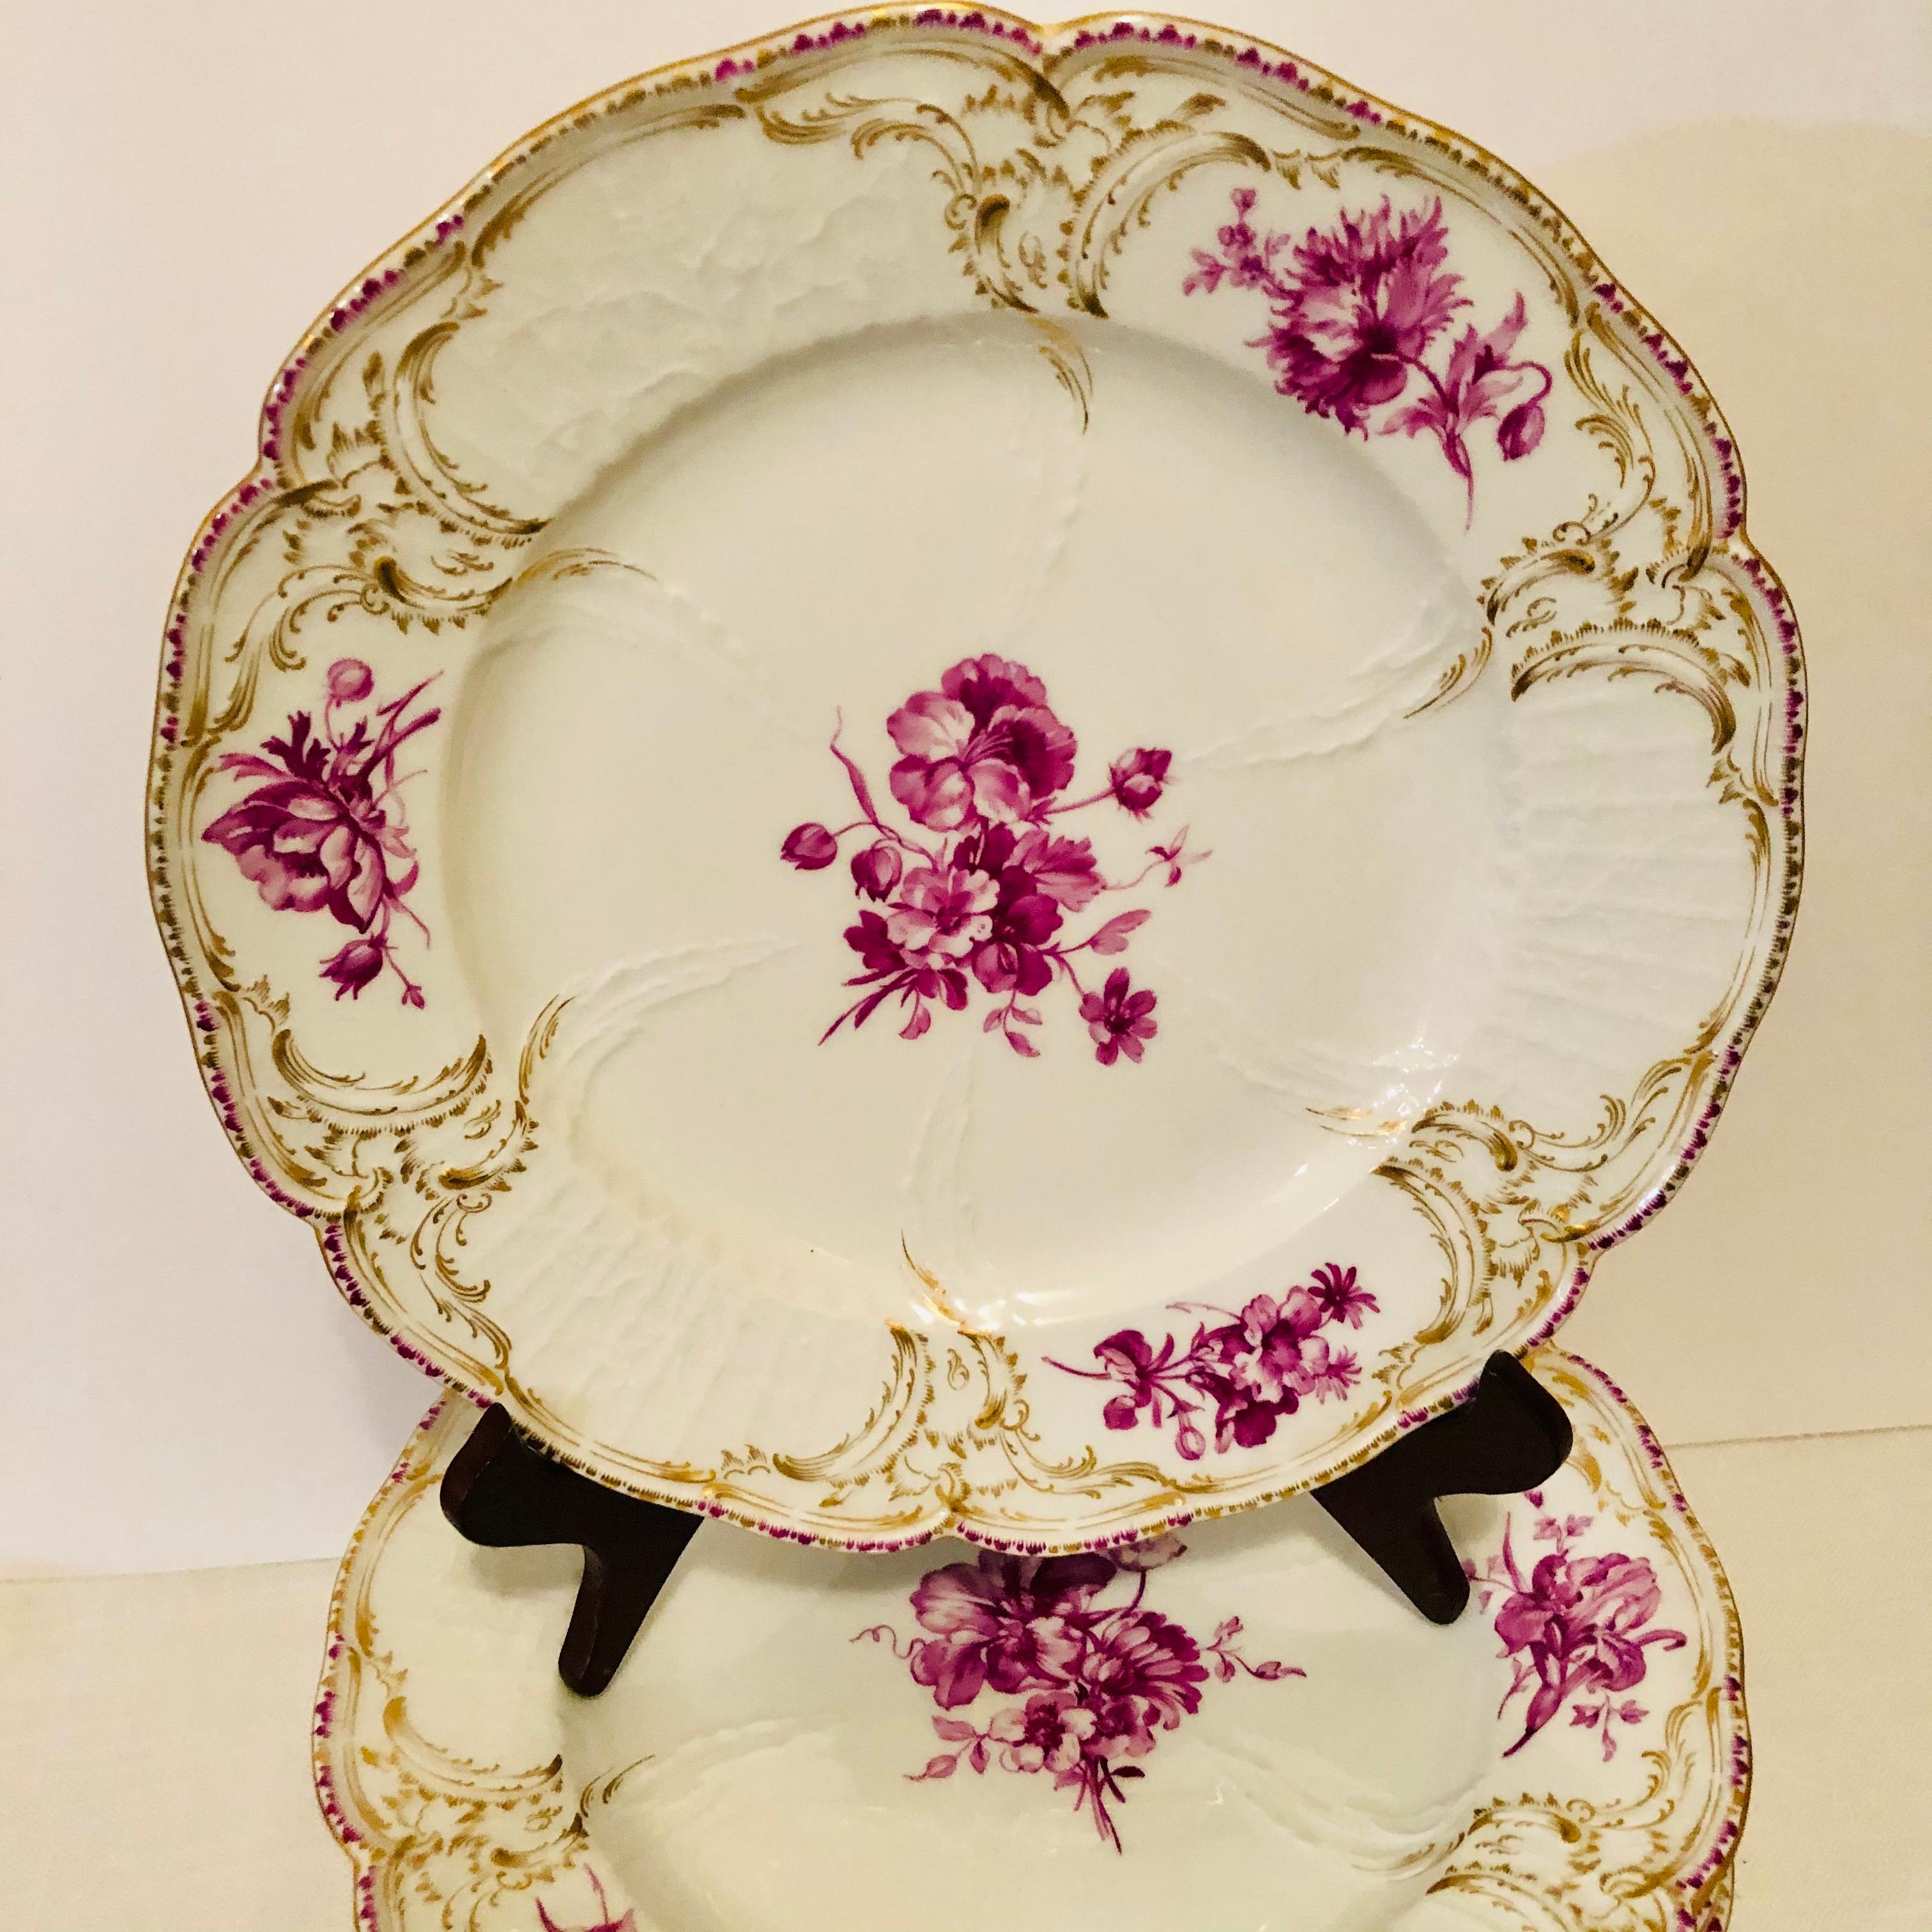 Rococo Twelve KPM Dinner Plates Each Painted with a Different Puce Flower Bouquet For Sale